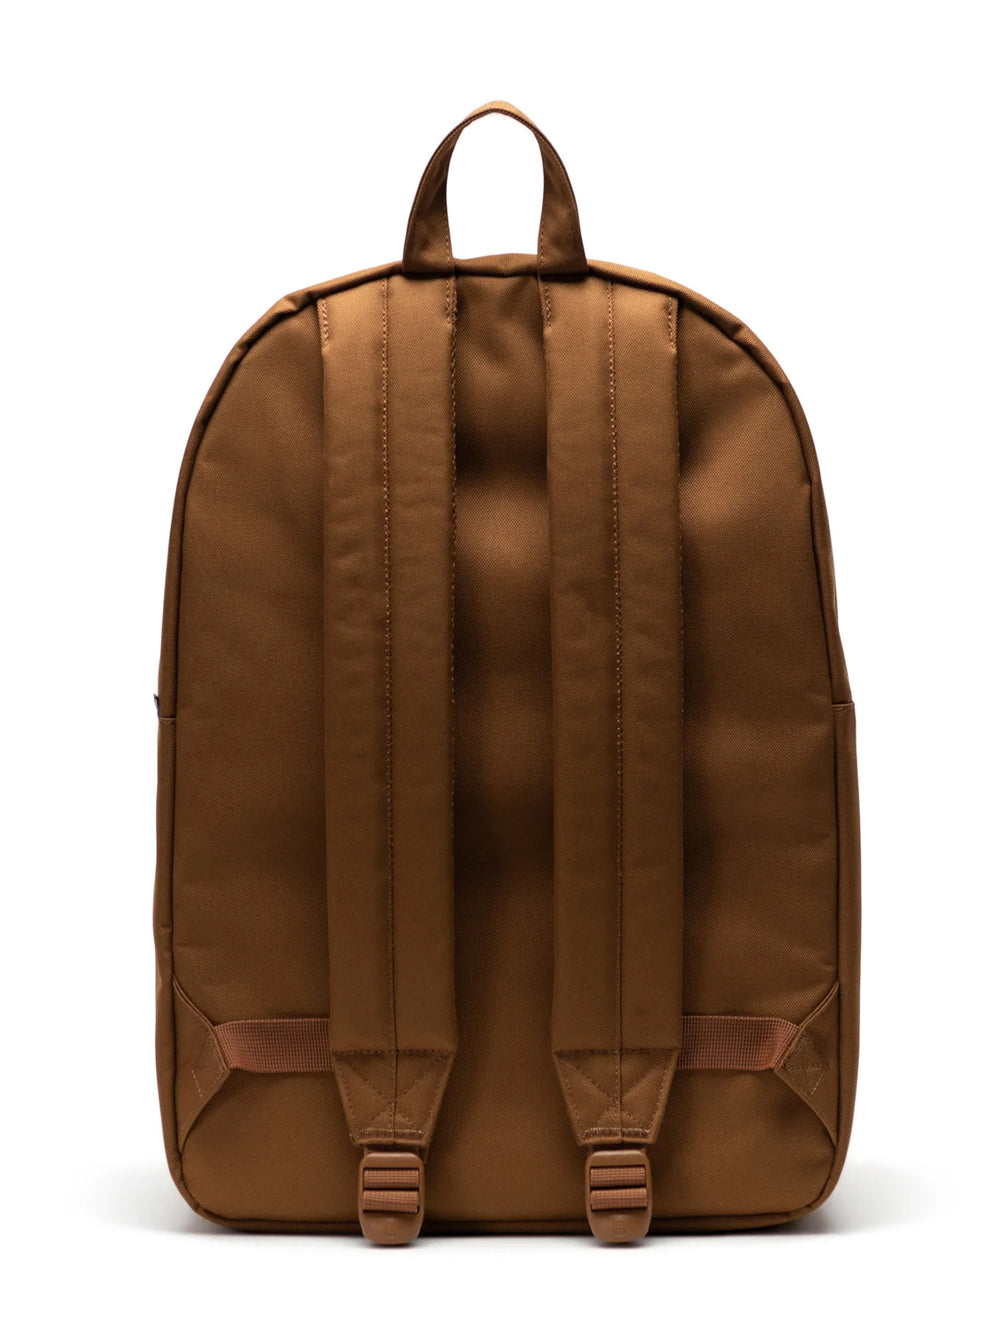 HERSCHEL SUPPLY CO. MIDWAY 25L BACKPACK